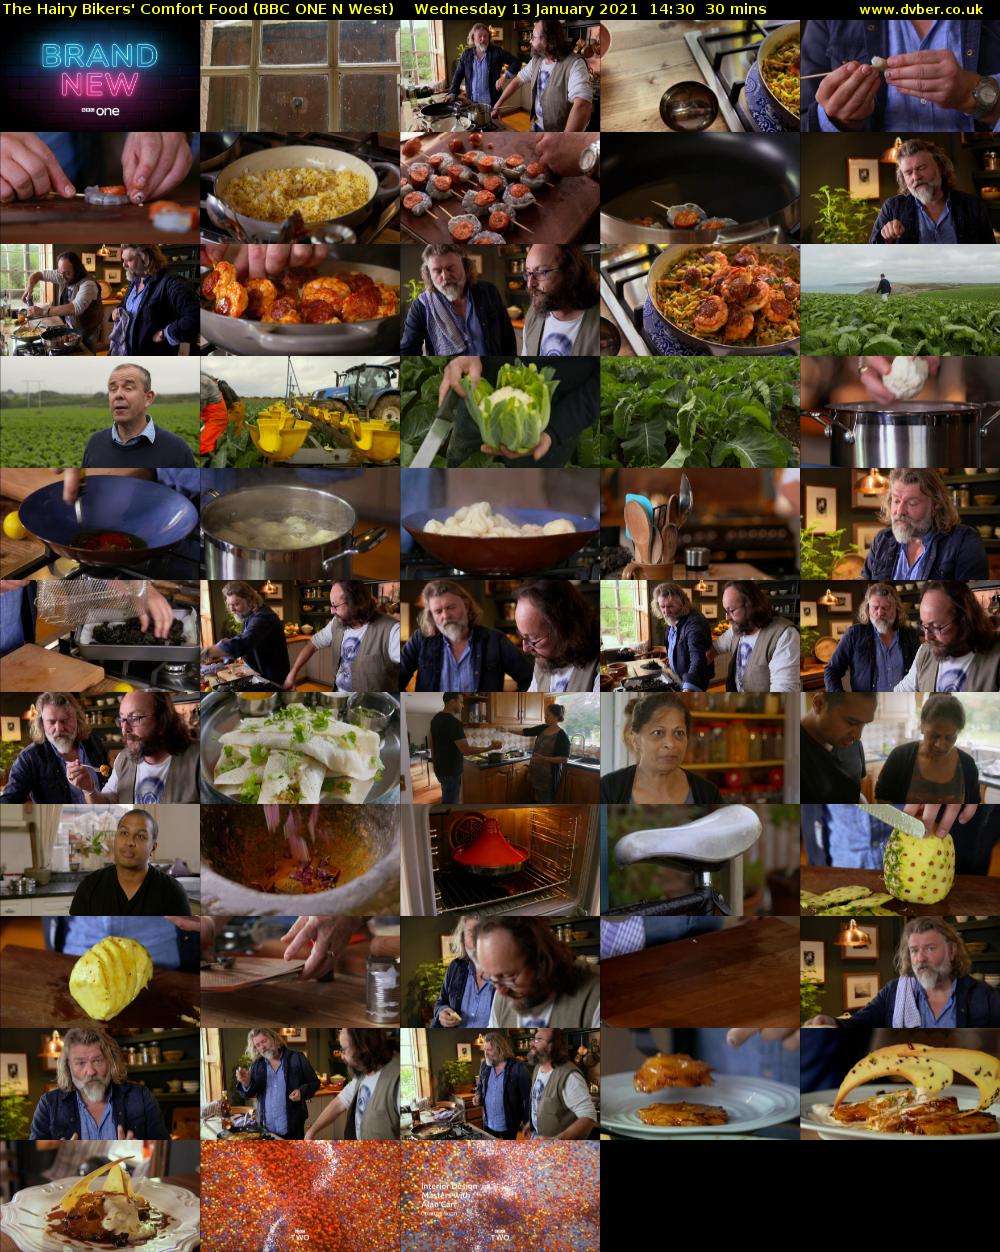 The Hairy Bikers' Comfort Food (BBC ONE N West) Wednesday 13 January 2021 14:30 - 15:00